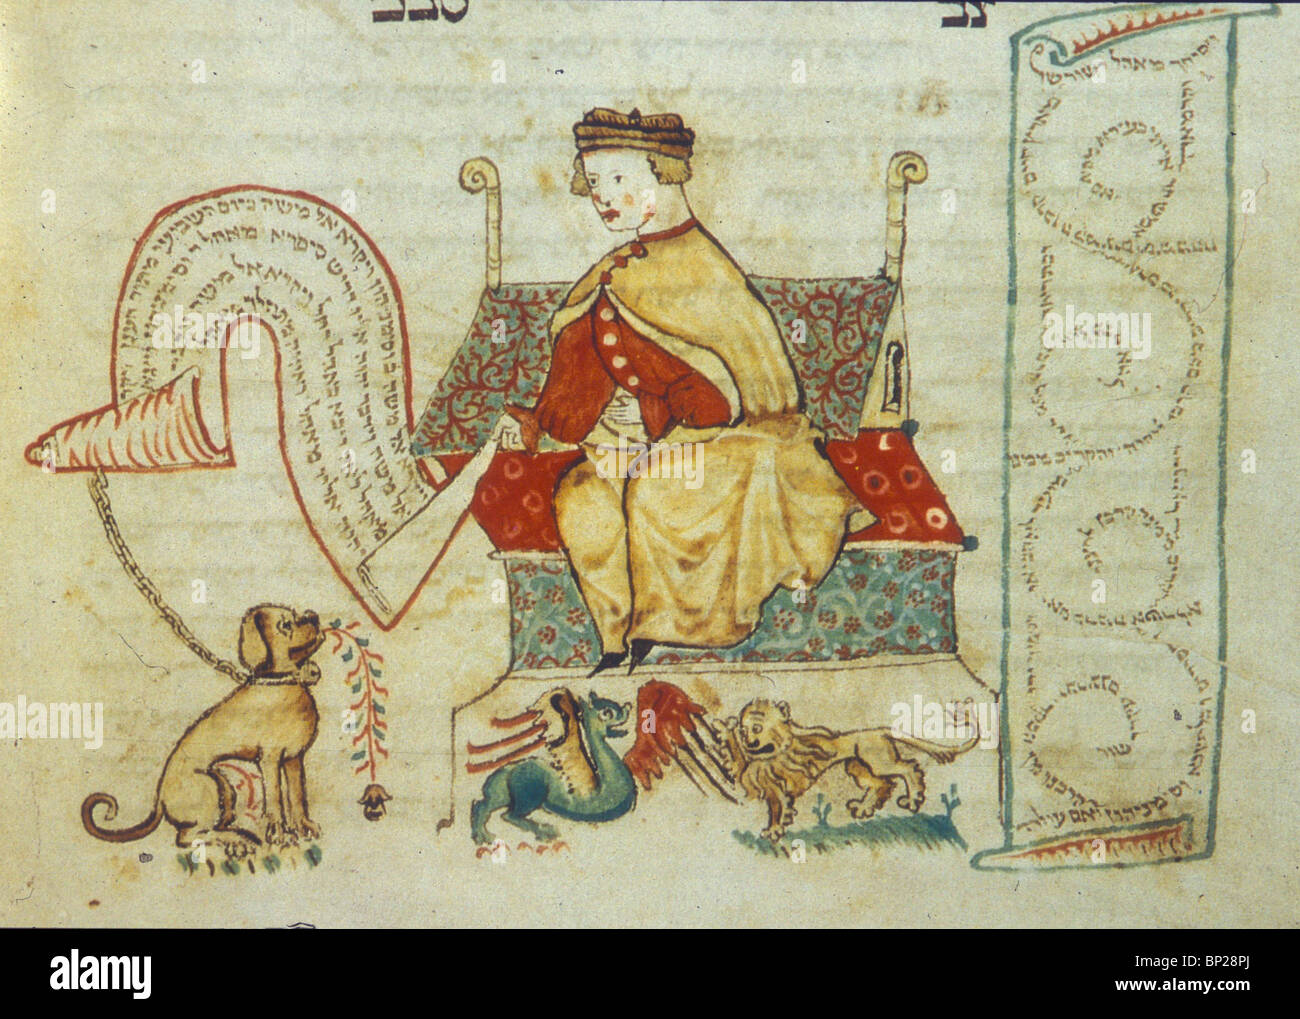 King Solomon On His Throne Surrounded With Animals Which According